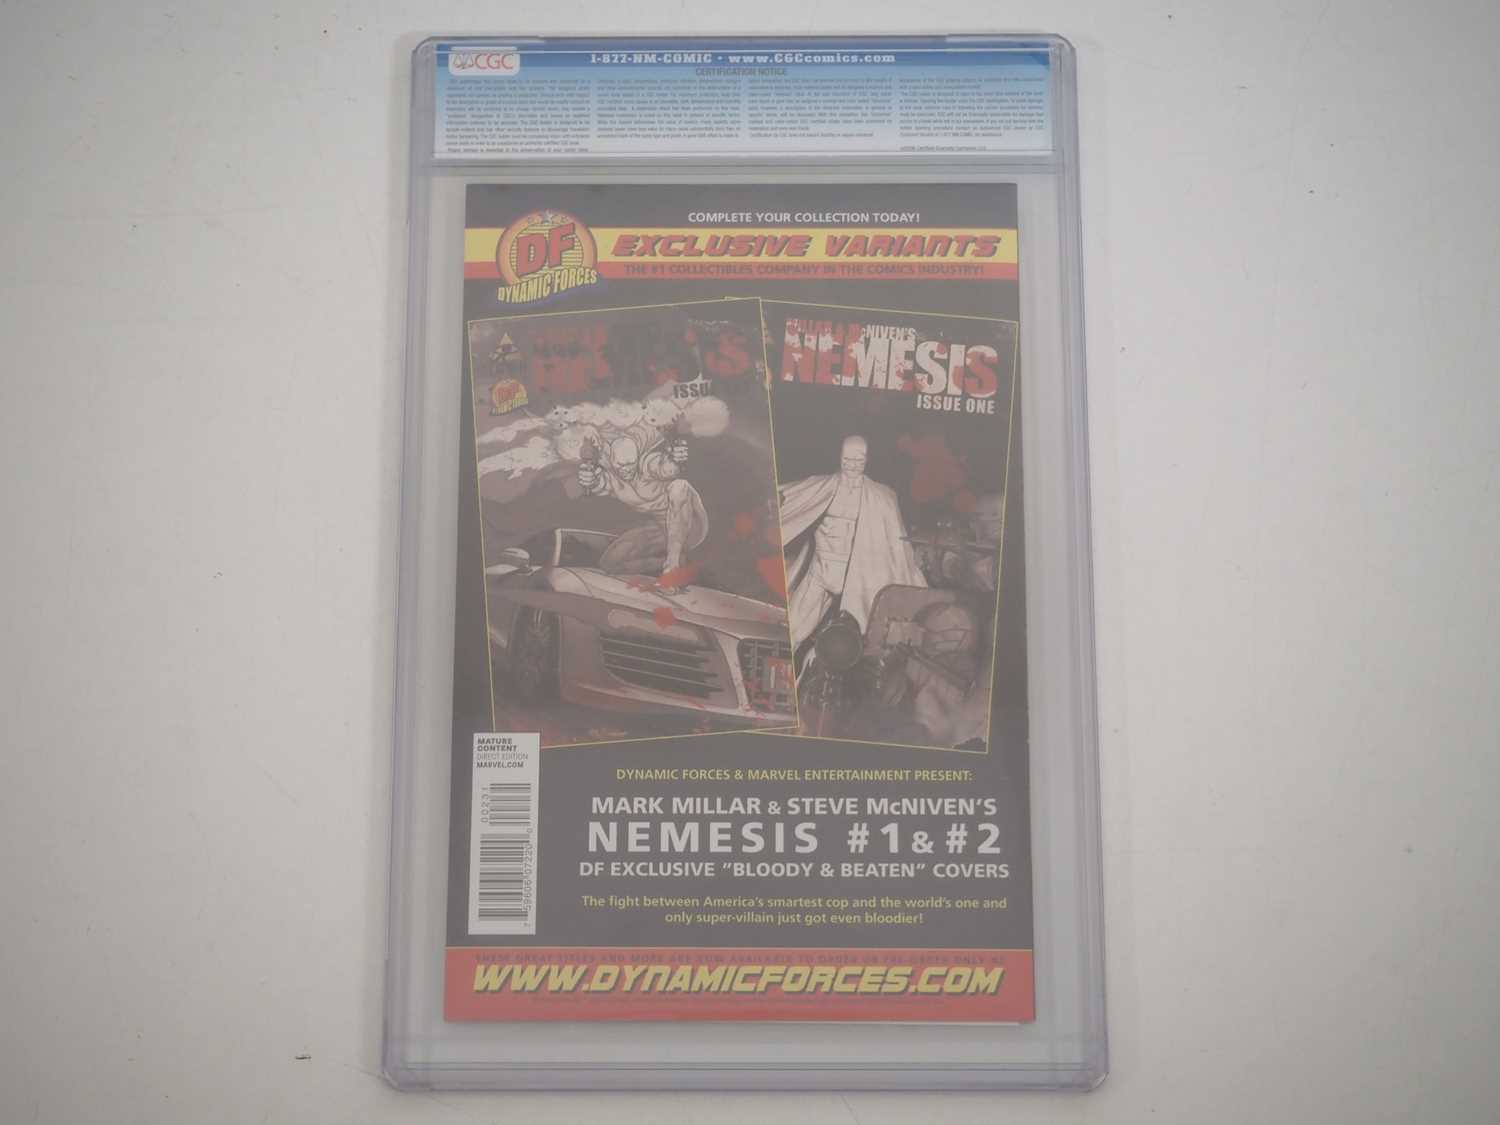 MILLAR & MCNIVEN'S NEMESIS #2 DYNAMIC FORCES EDITION (2010 - MARVEL/ICON) - GRADED 9.8 (NM/MINT) - Image 2 of 6